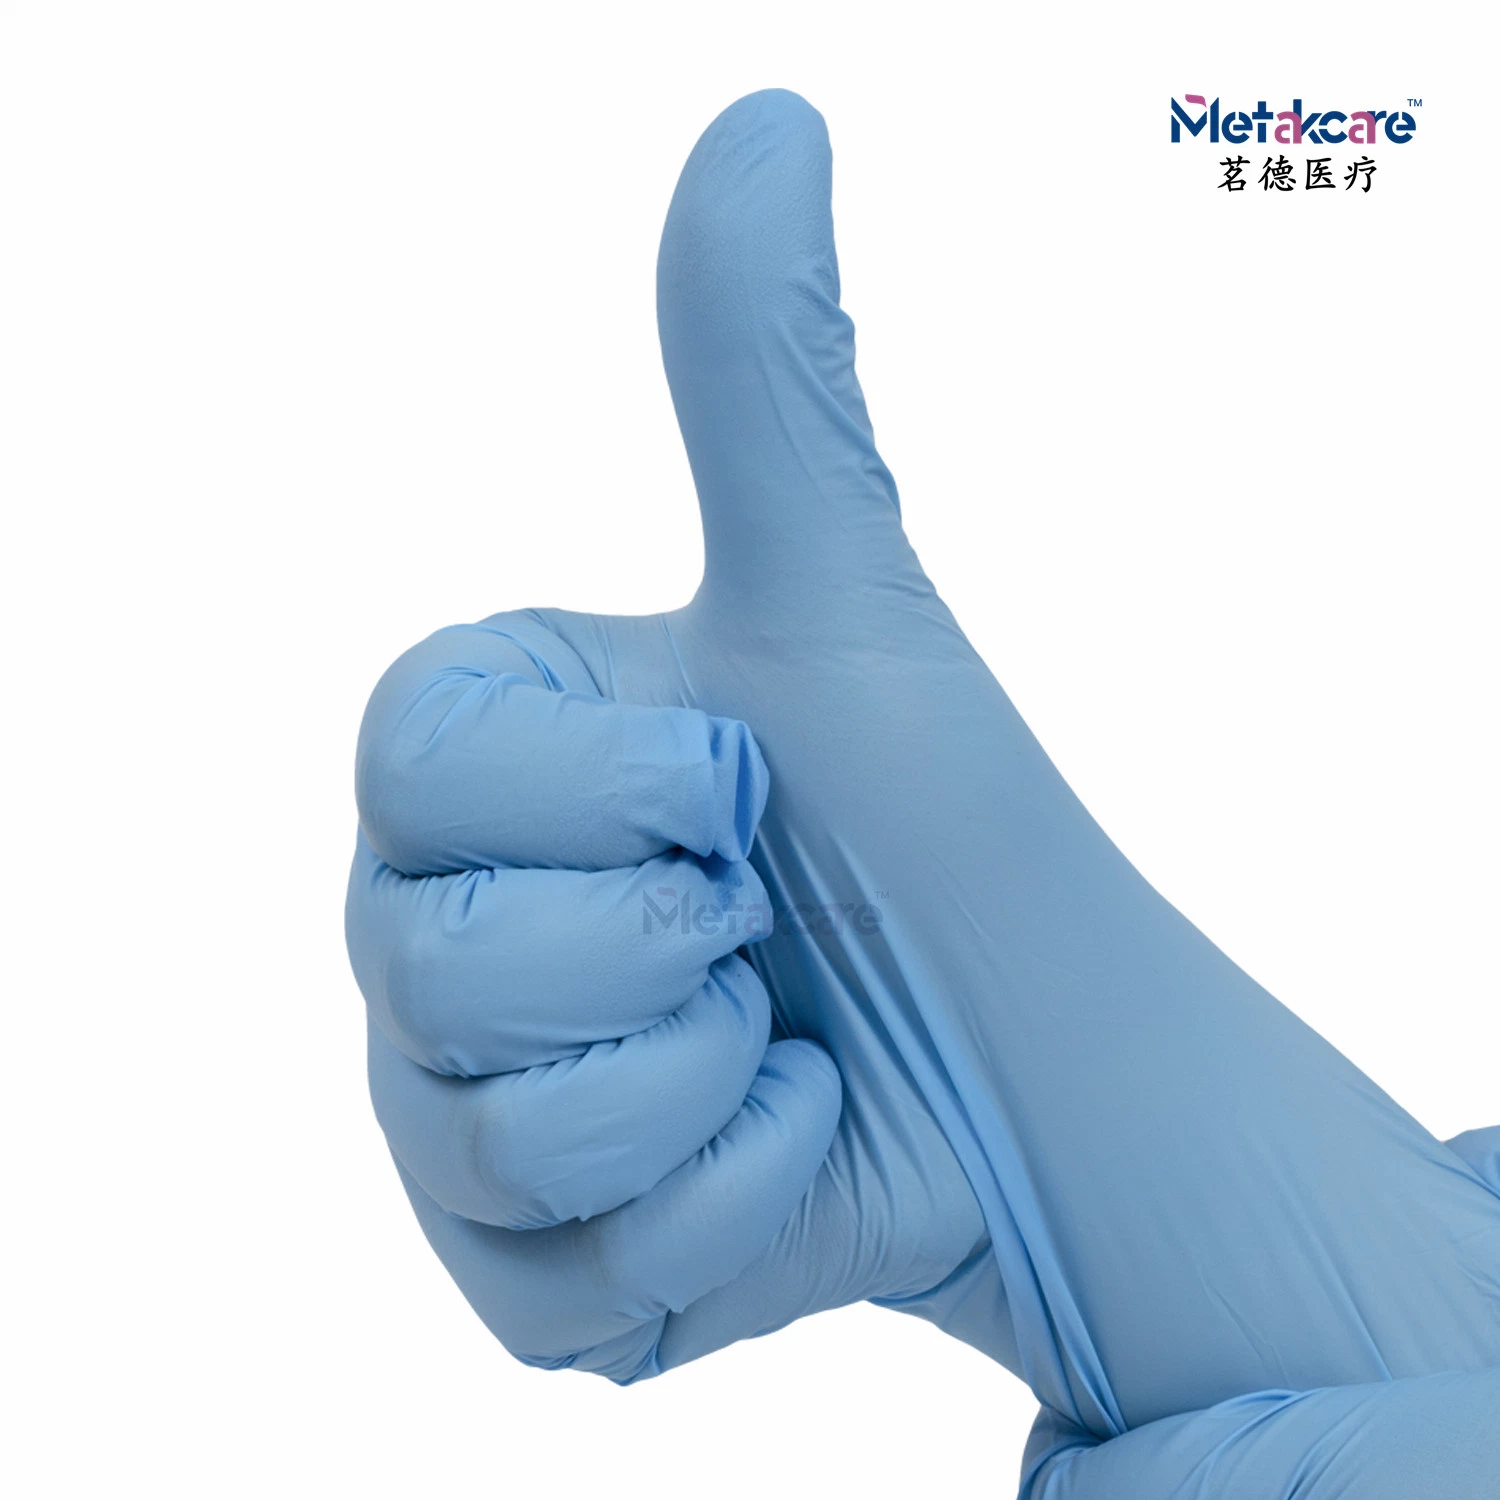 Blue Rubber Disposable Latex-Free Powder Free Exam Medical Nitrile Gloves Made in China